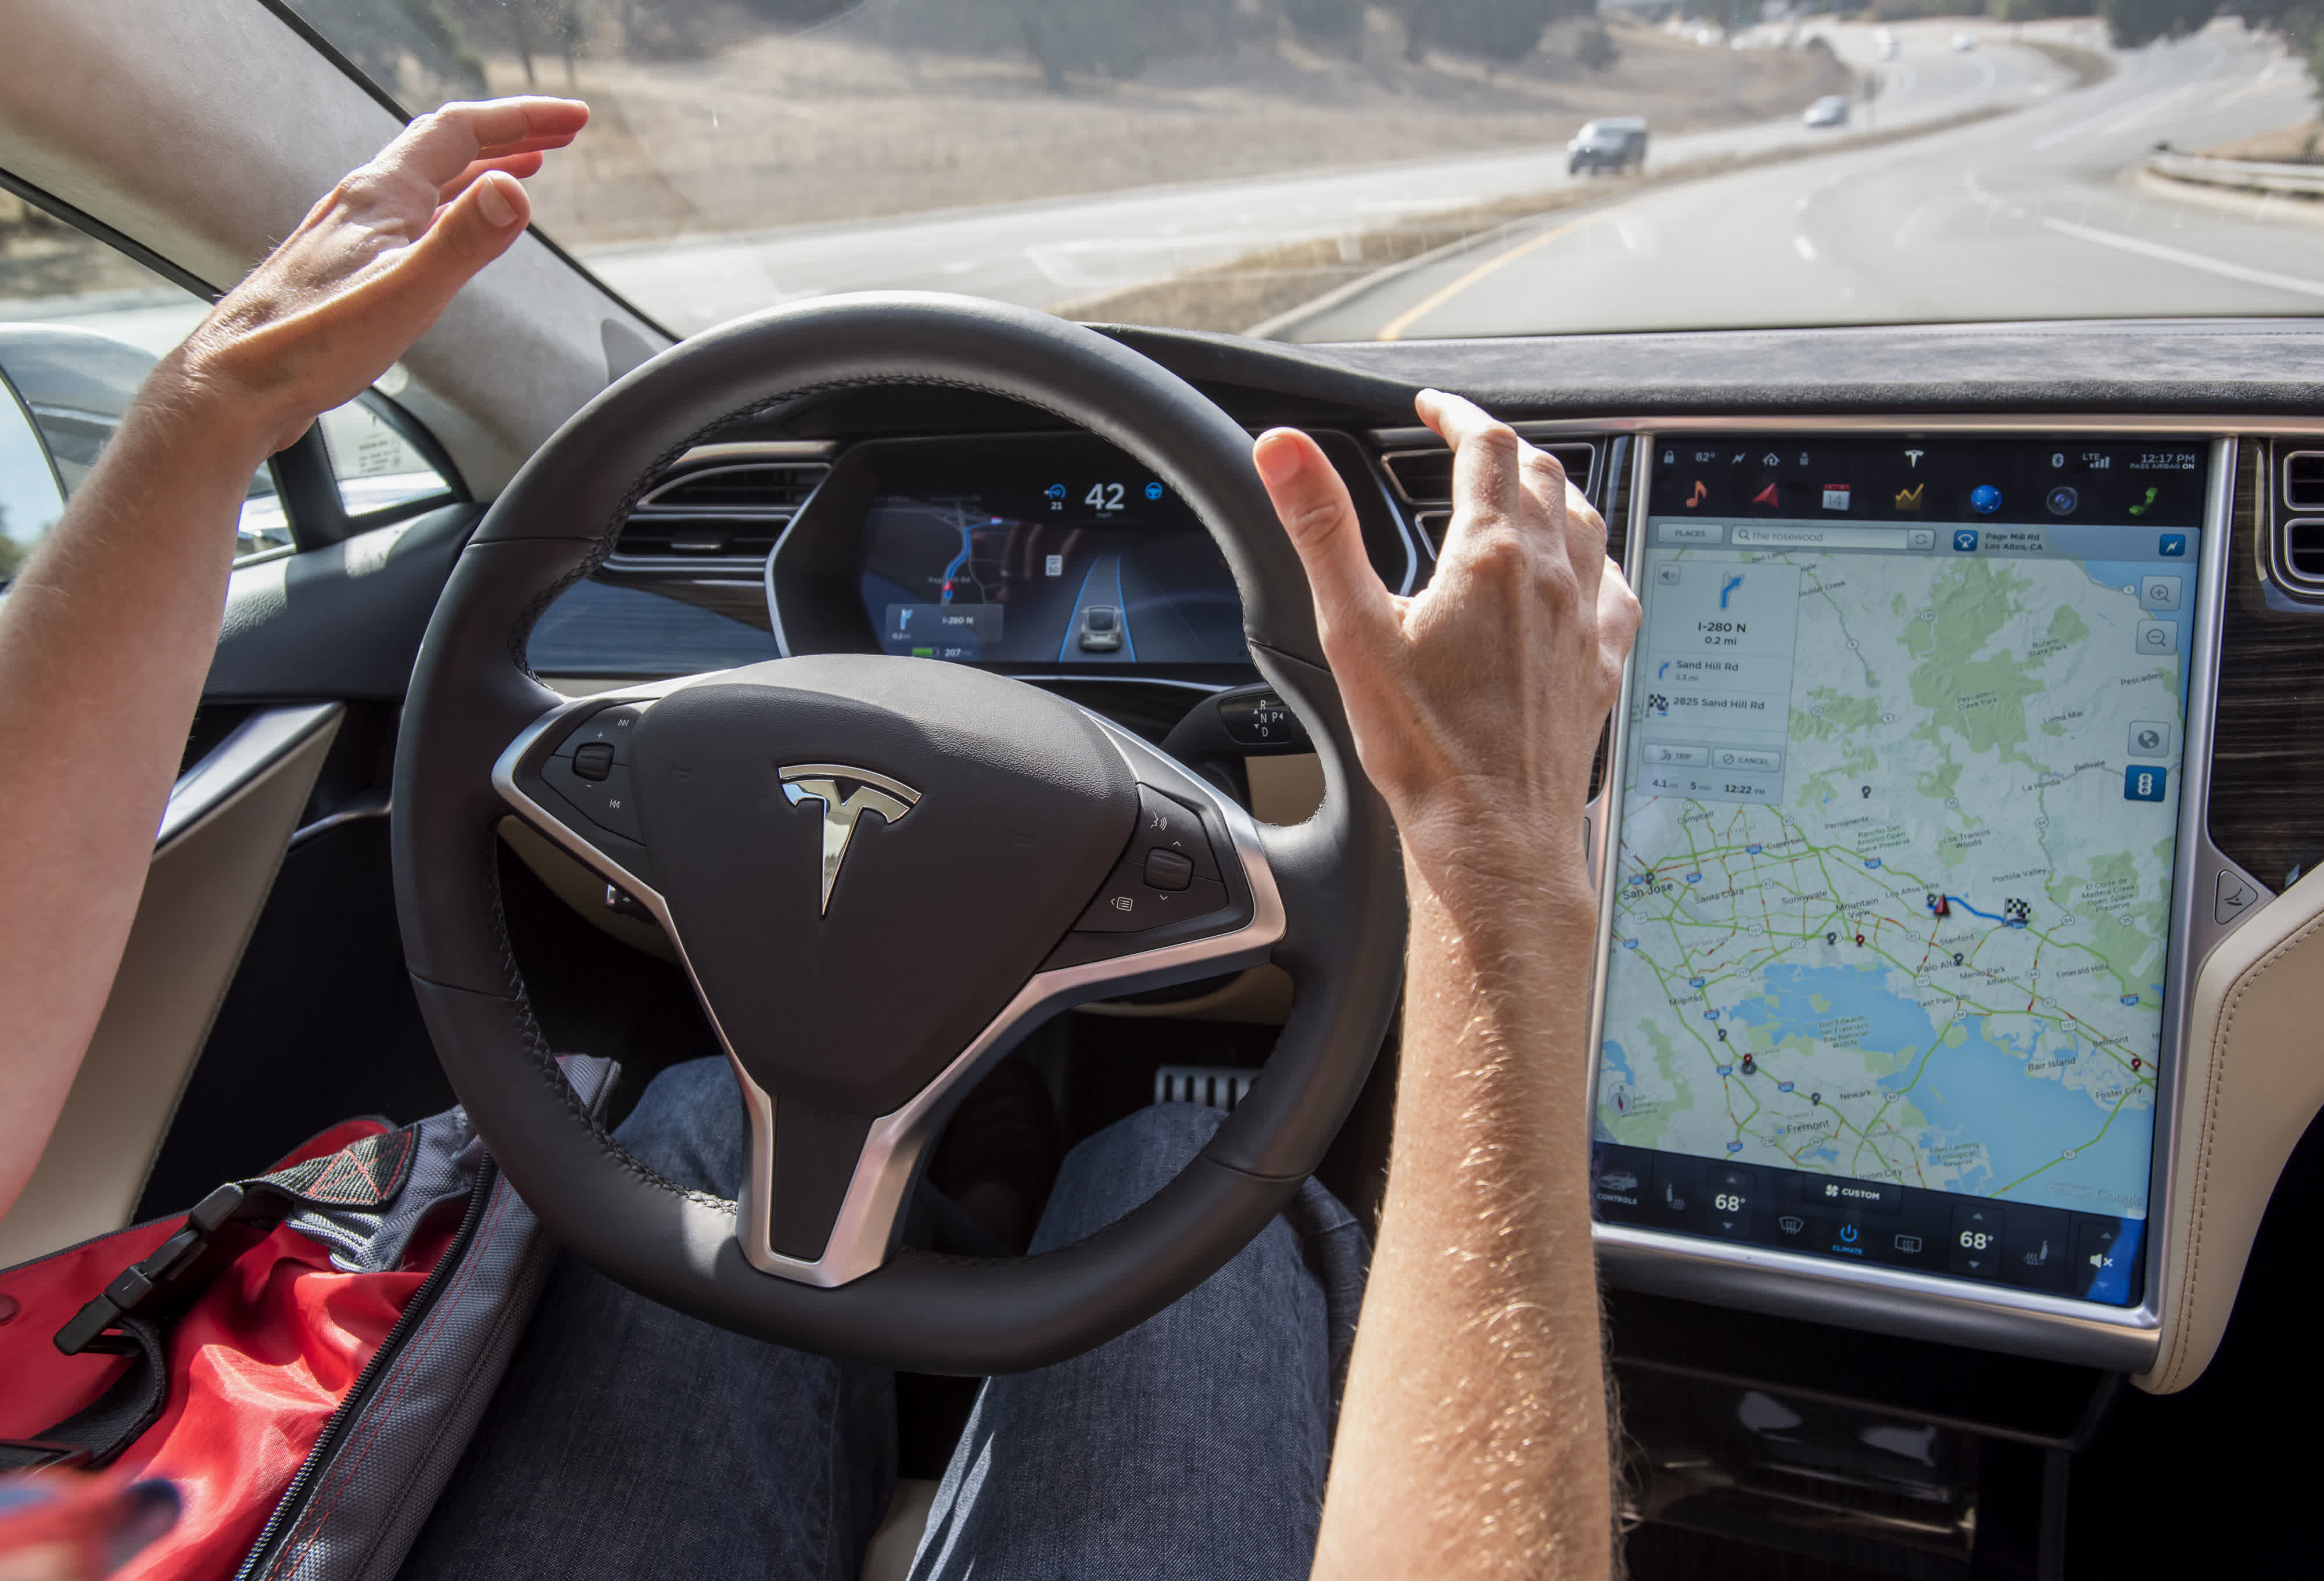 Tesla is dropping ultrasonic sensors from new vehicles as it moves to camera-only Tesla Vision